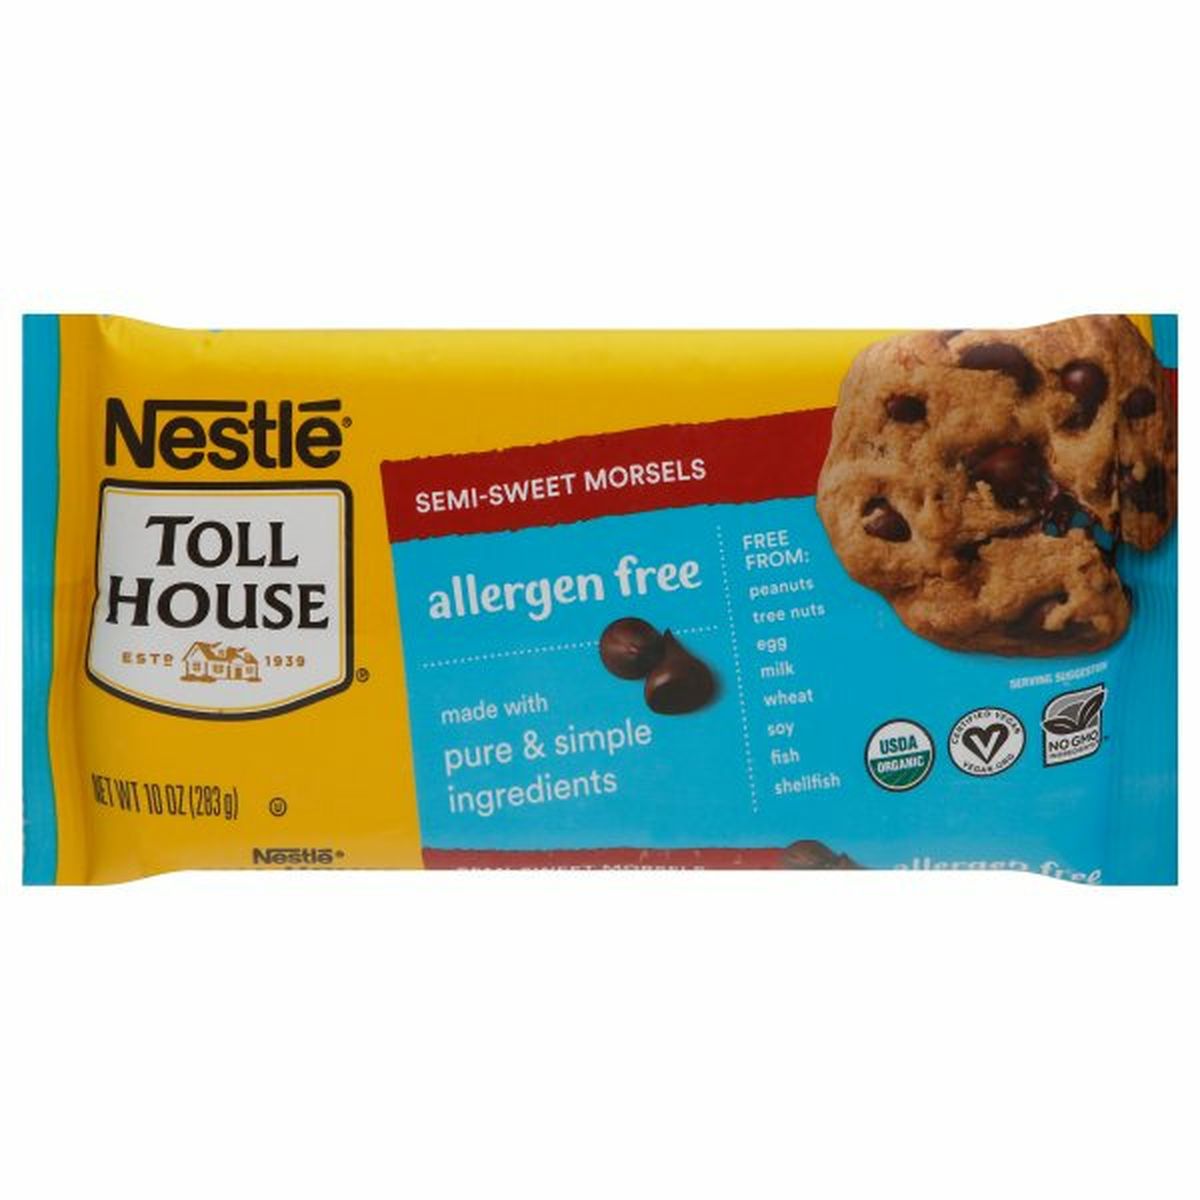 Calories in Toll House Morsels, Semi-Sweet, Allergen Free